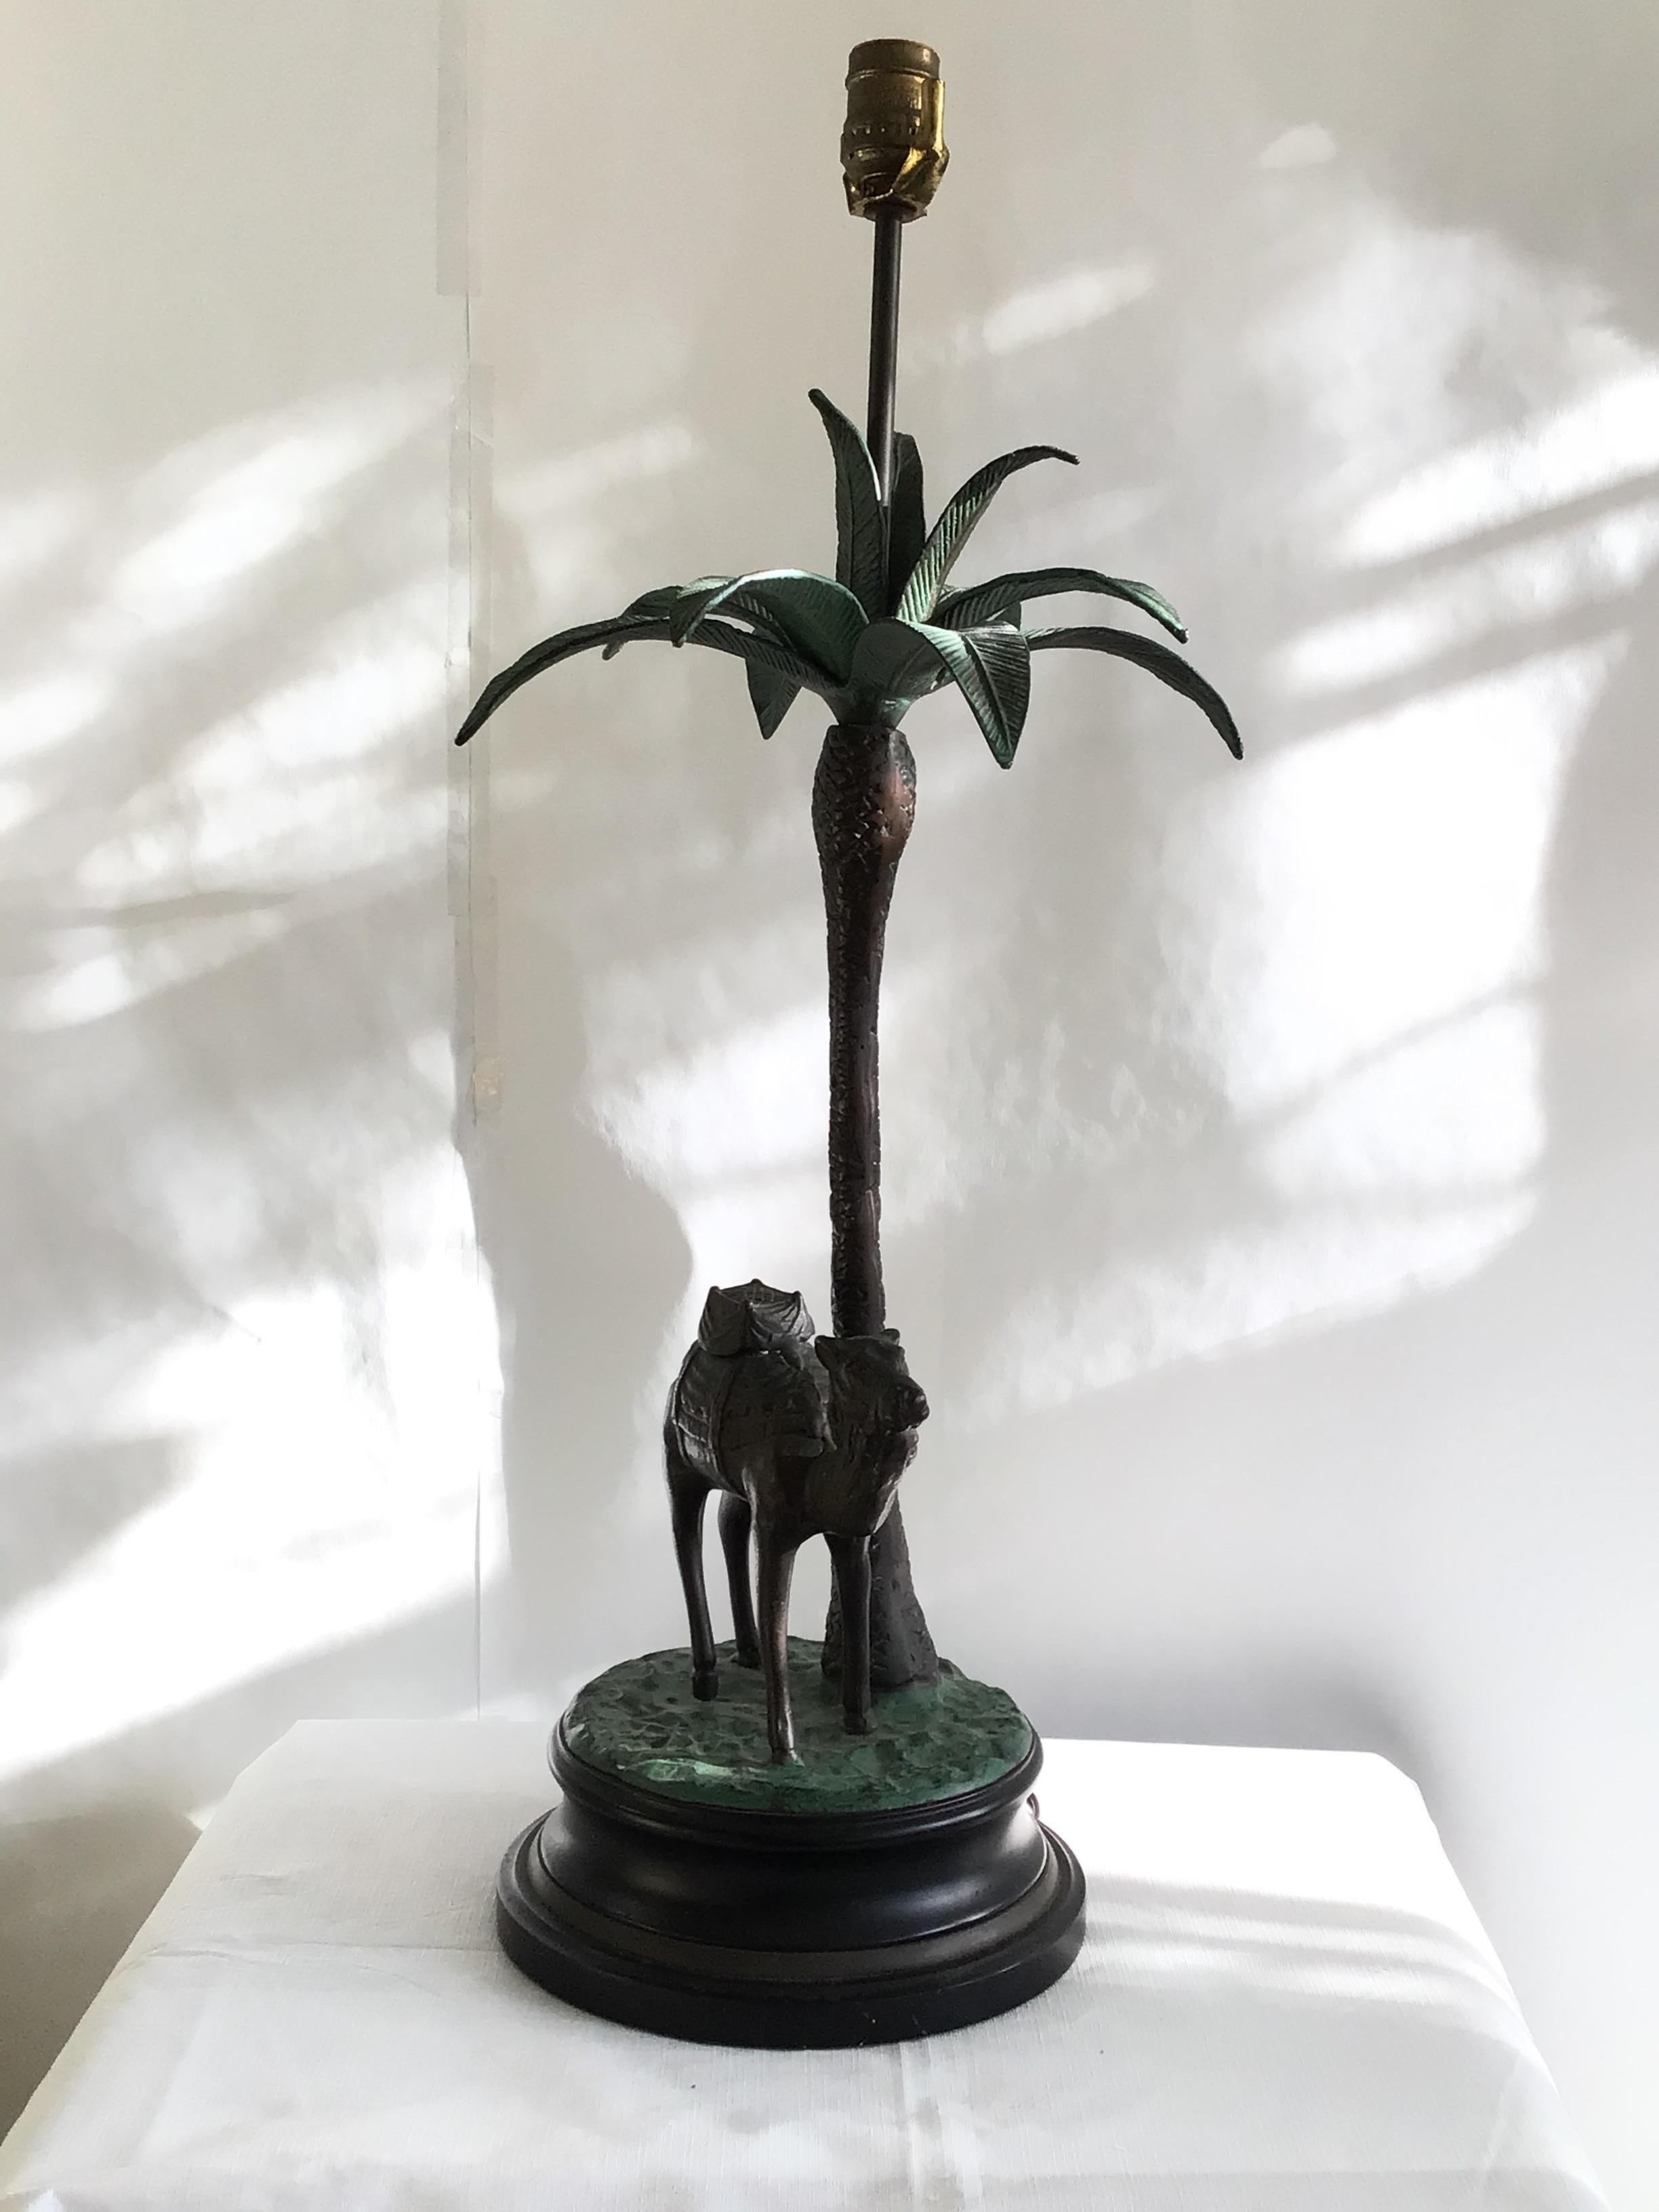 1950s Camel & Palm Trees Decorative Table Lamp on Wood and Metal Base
Classically posed under a palm tree nicely scaled in heavy old cast brass
Some of the leaves and bottom of base are painted
Height is to top of socket
Needs rewiring.